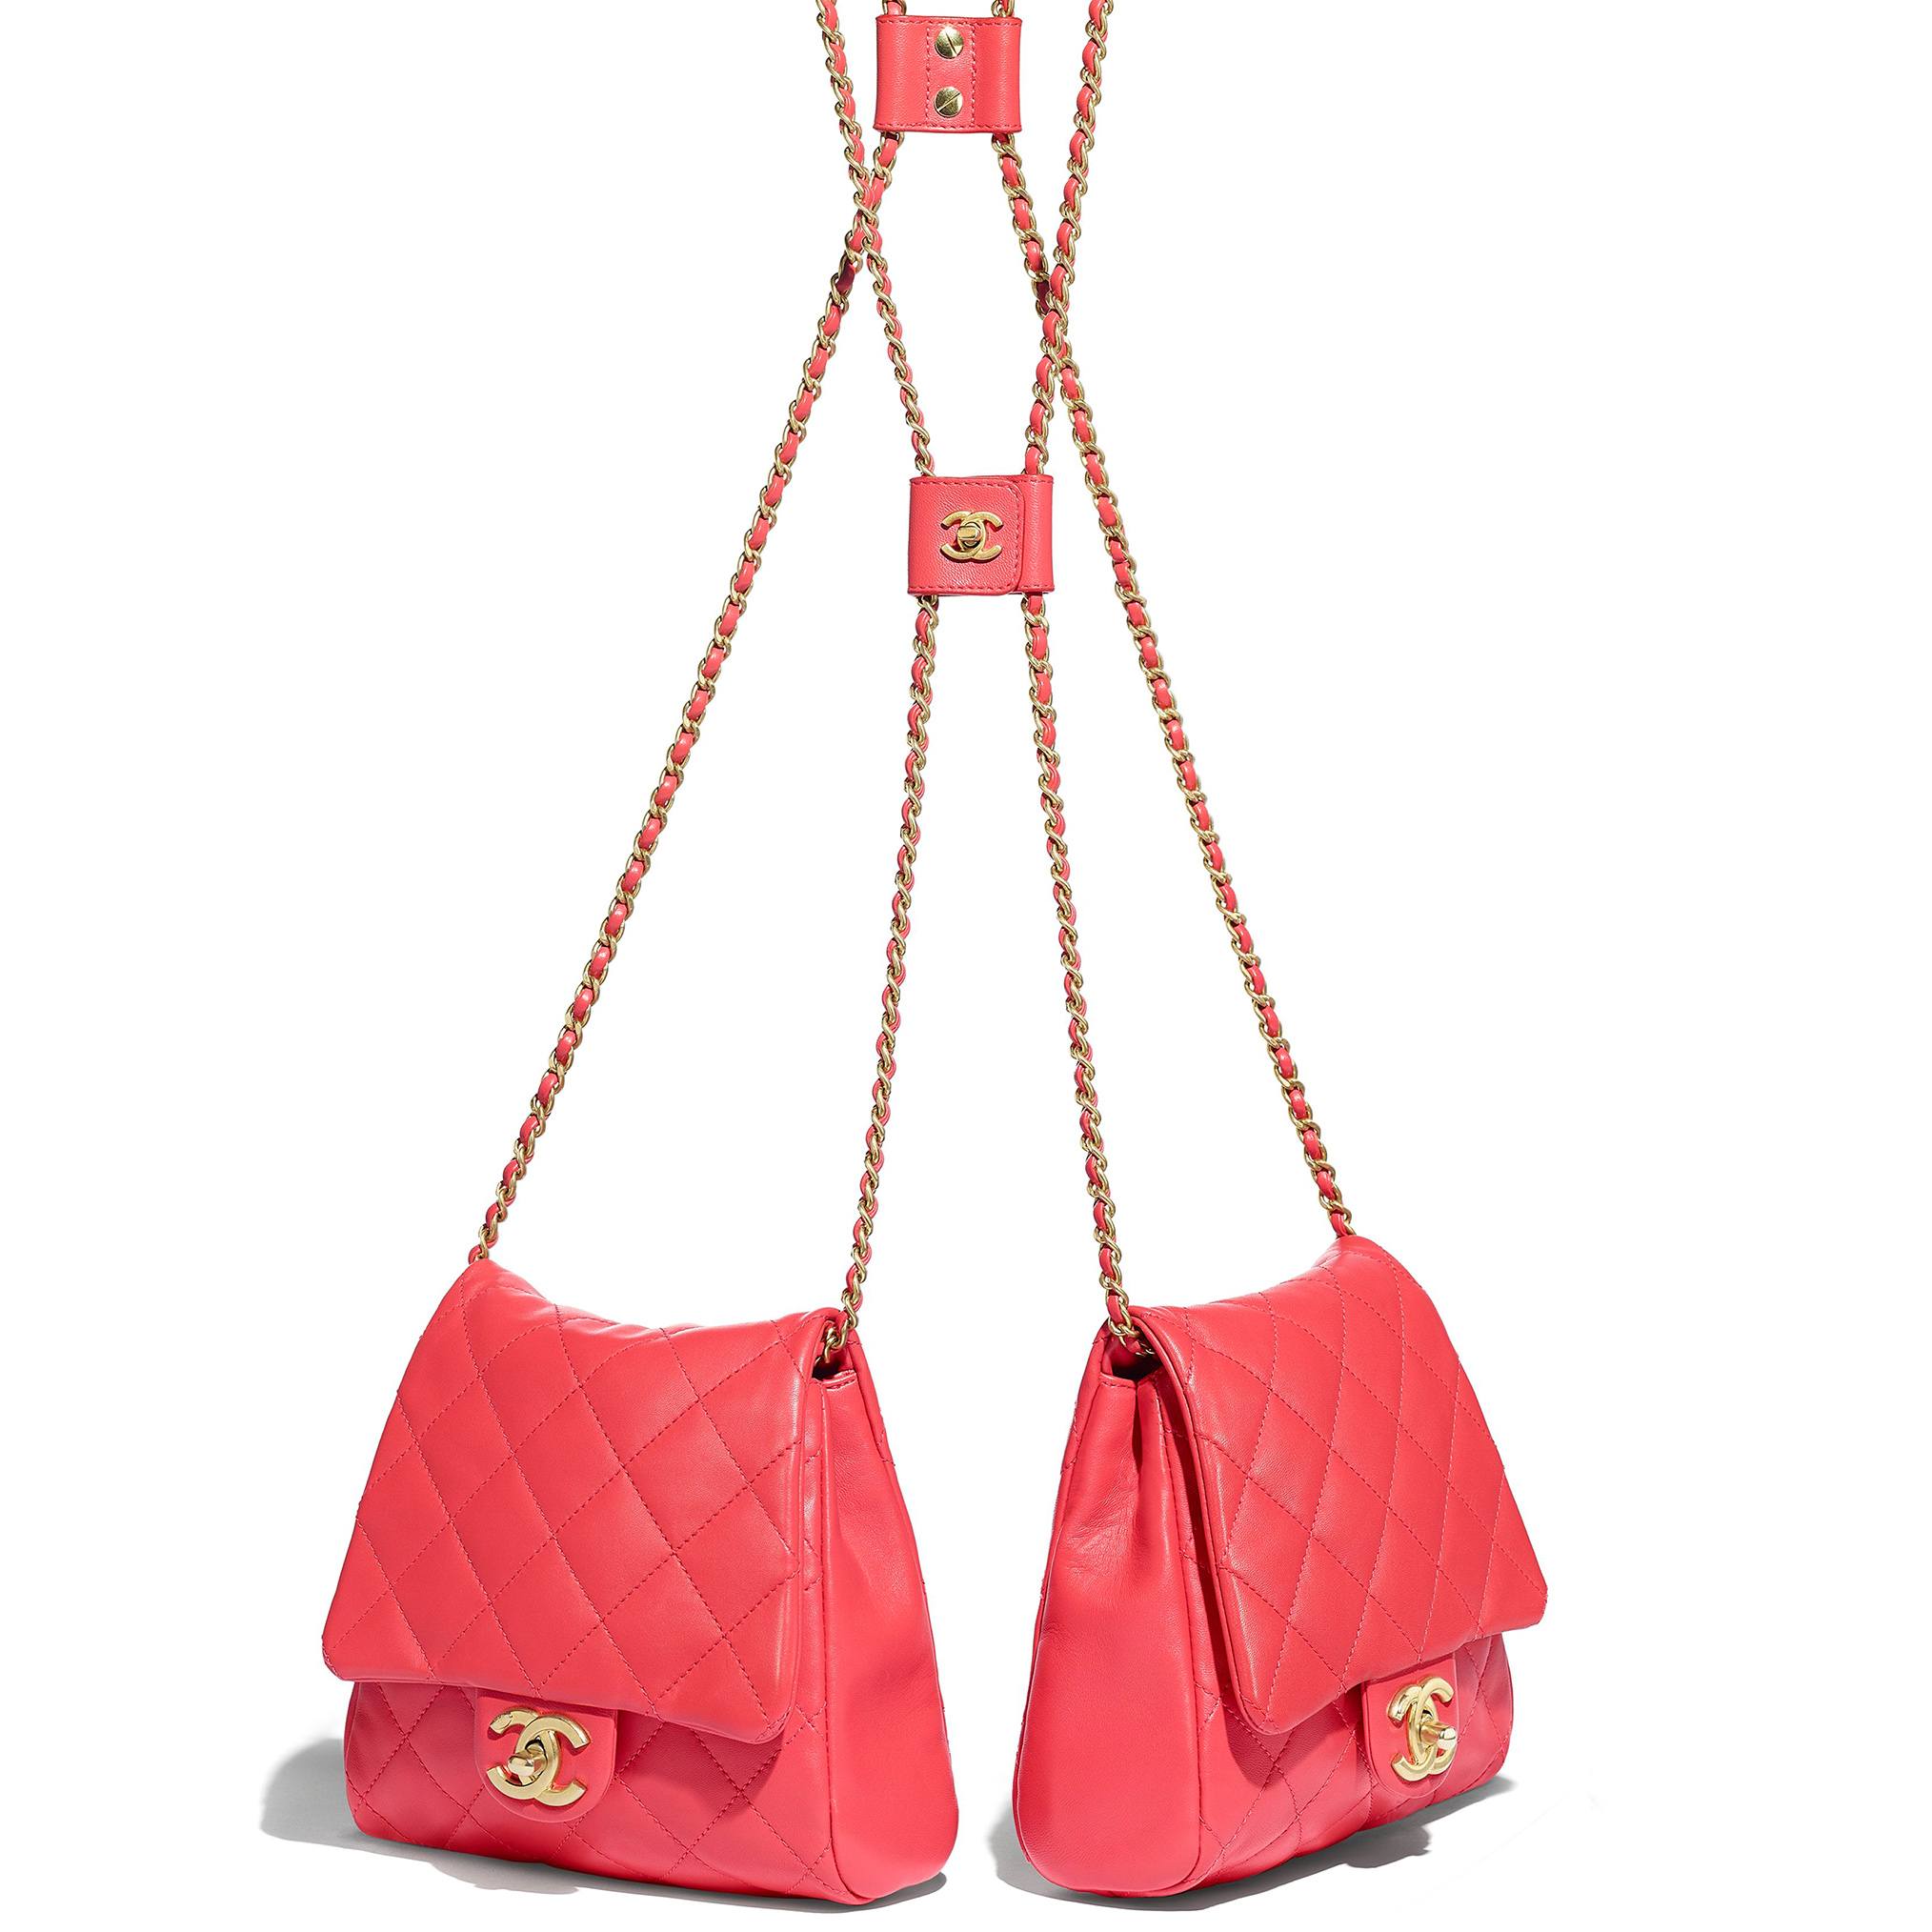 Pink Chanel double quilted Side bags that go over the shoulder